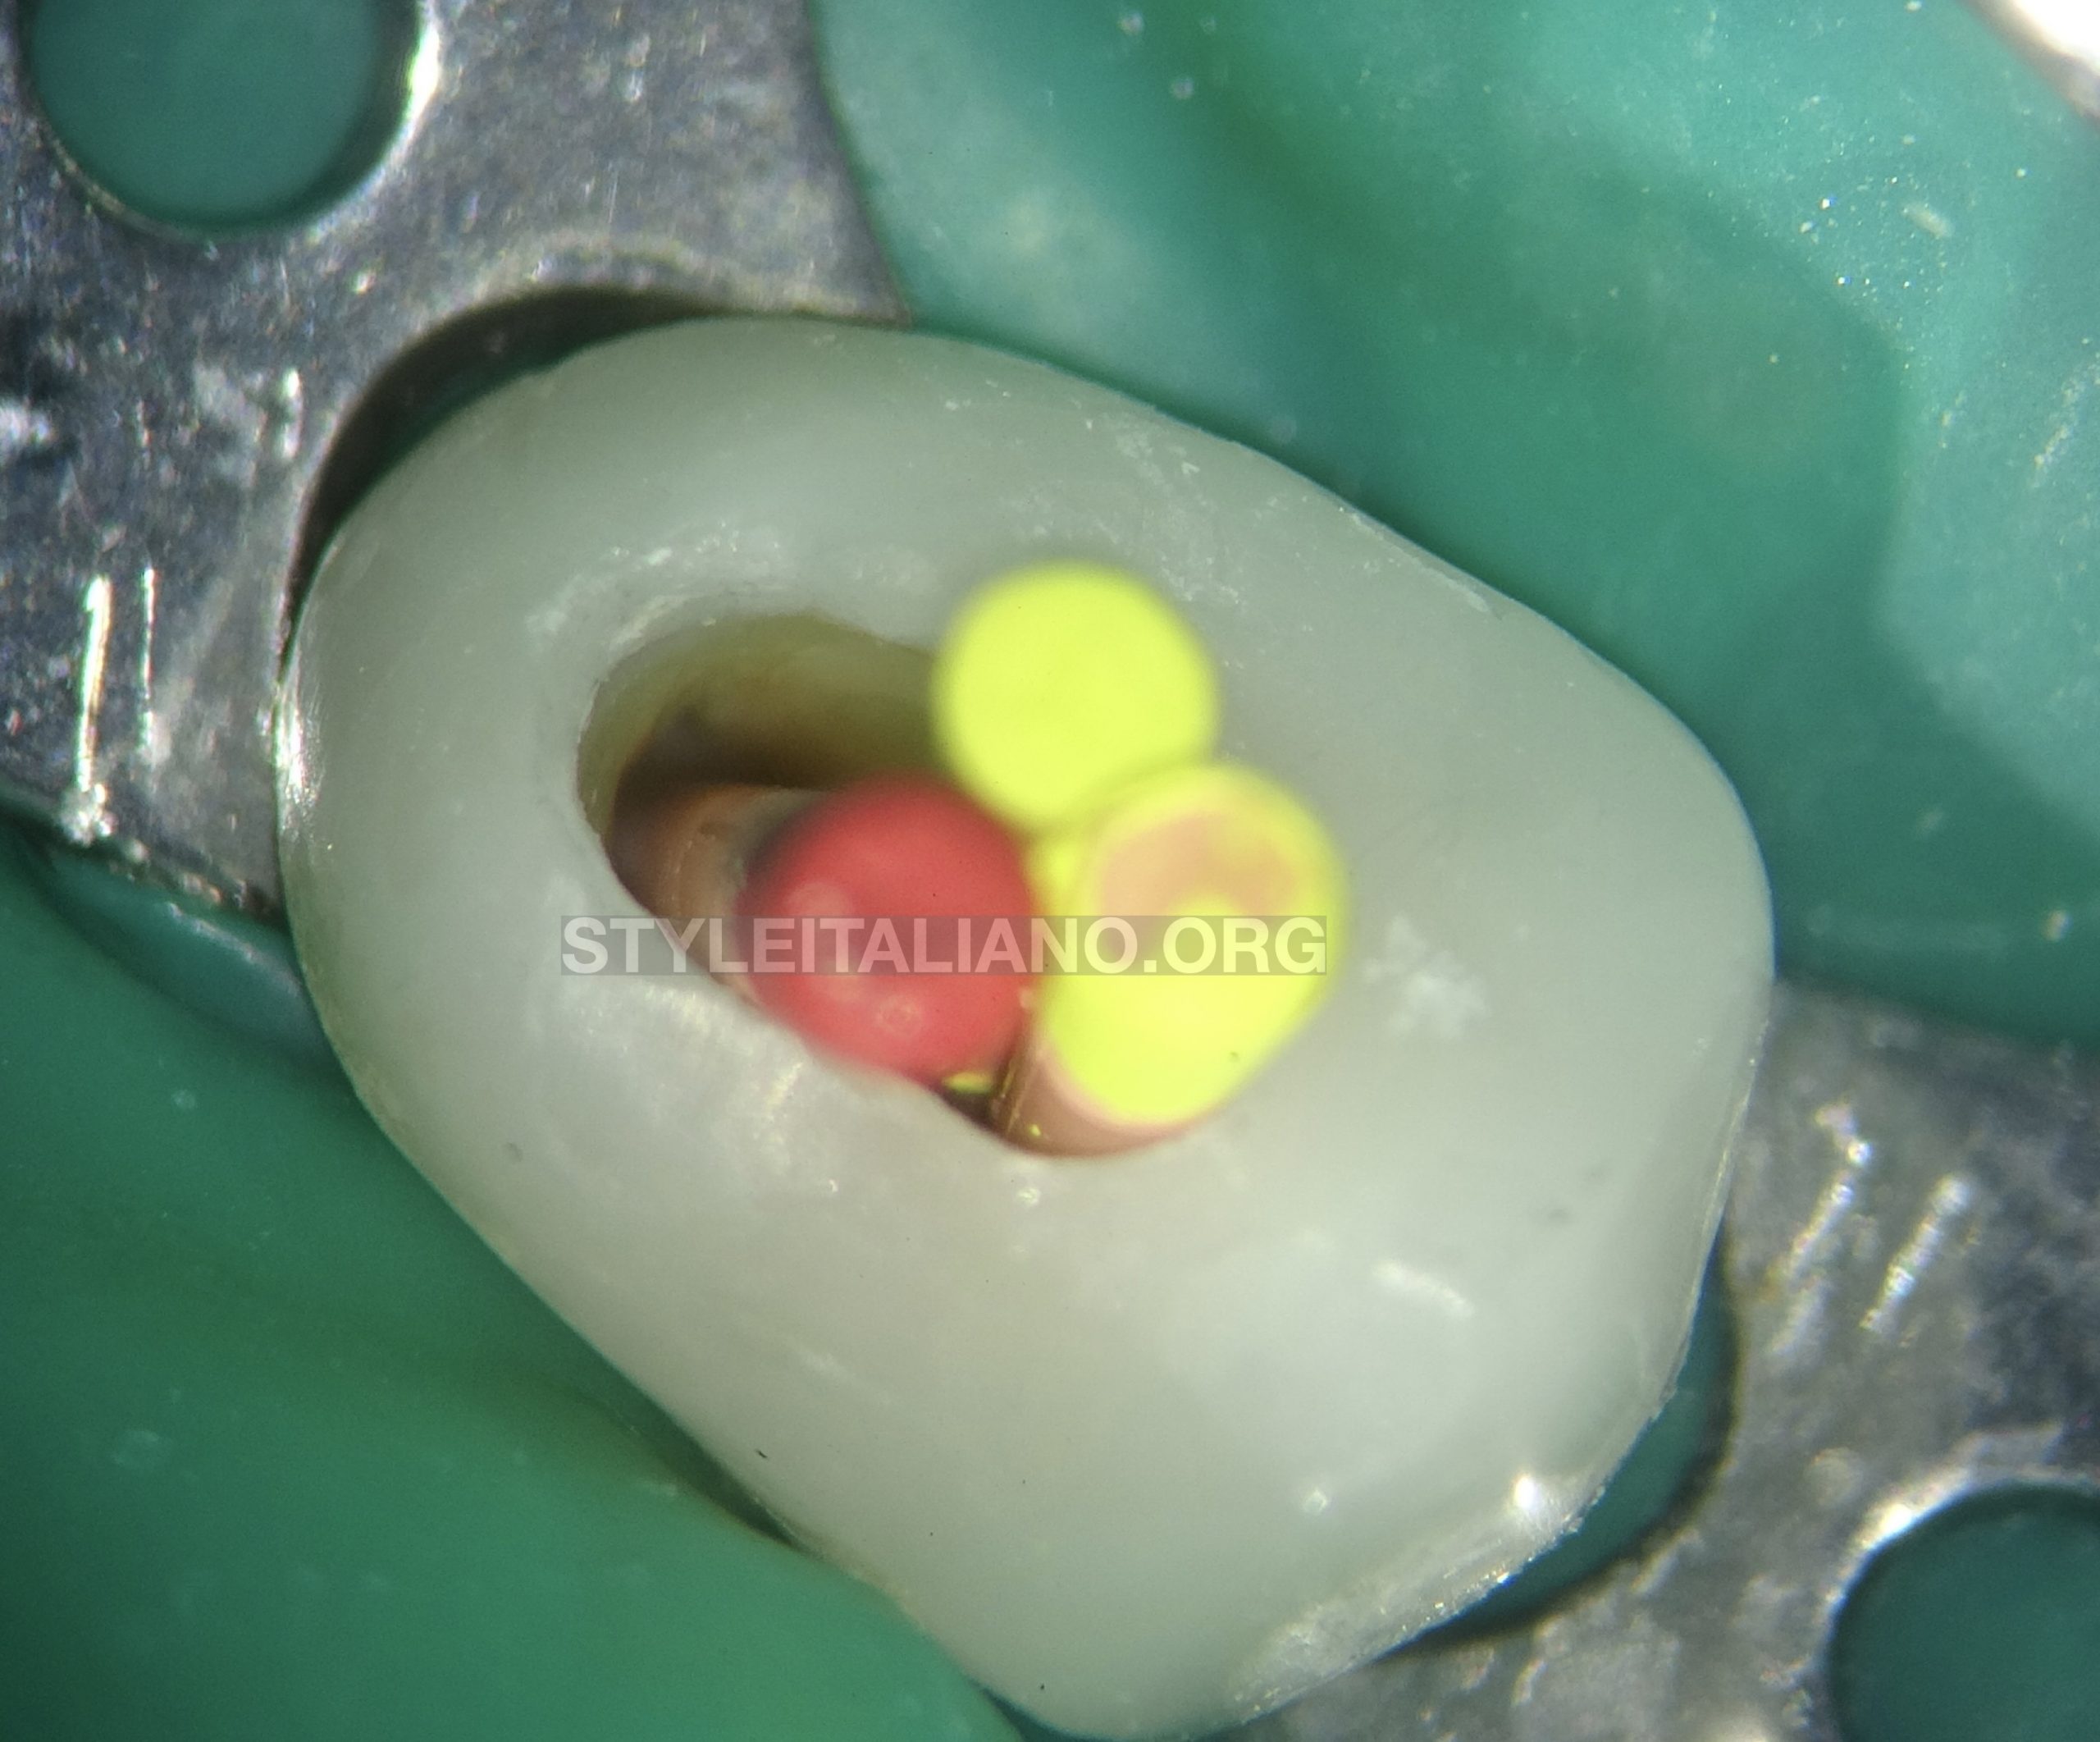 Retreatment of a maxillary premolar with missed canal